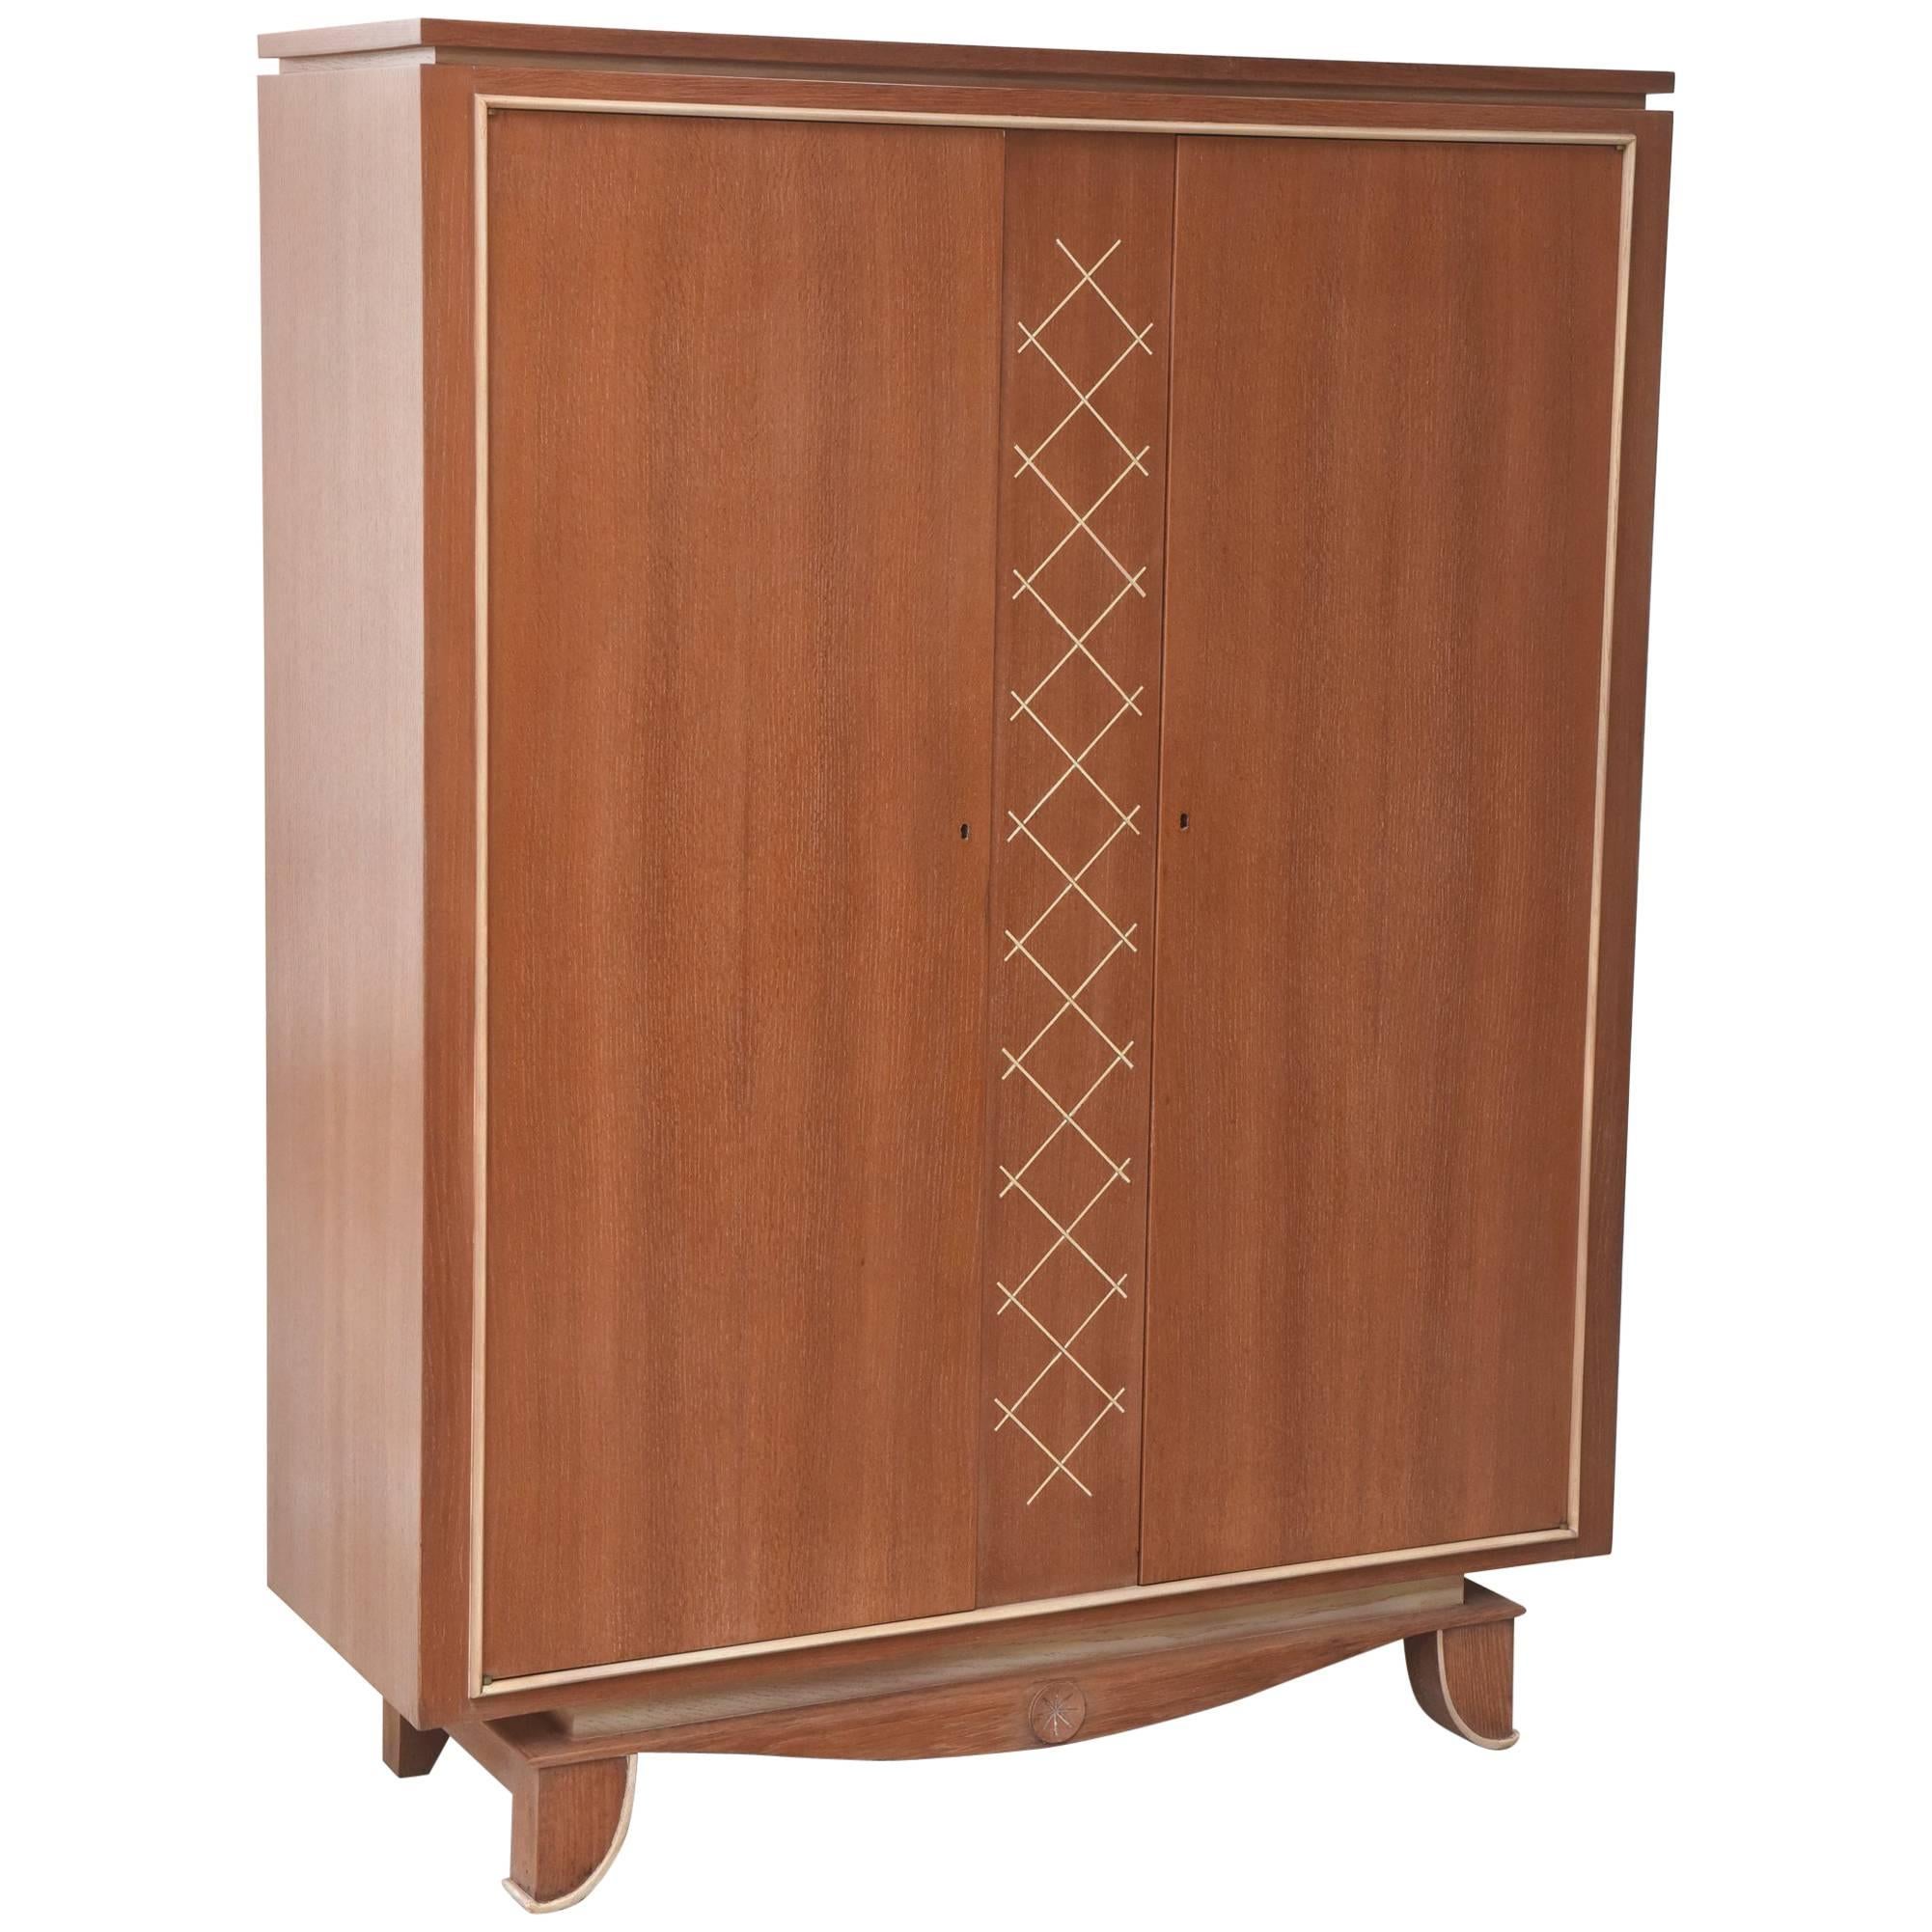 Pierre Petit French Modern Limed Oak and Parchment Tall Cabinet, 1940s For Sale